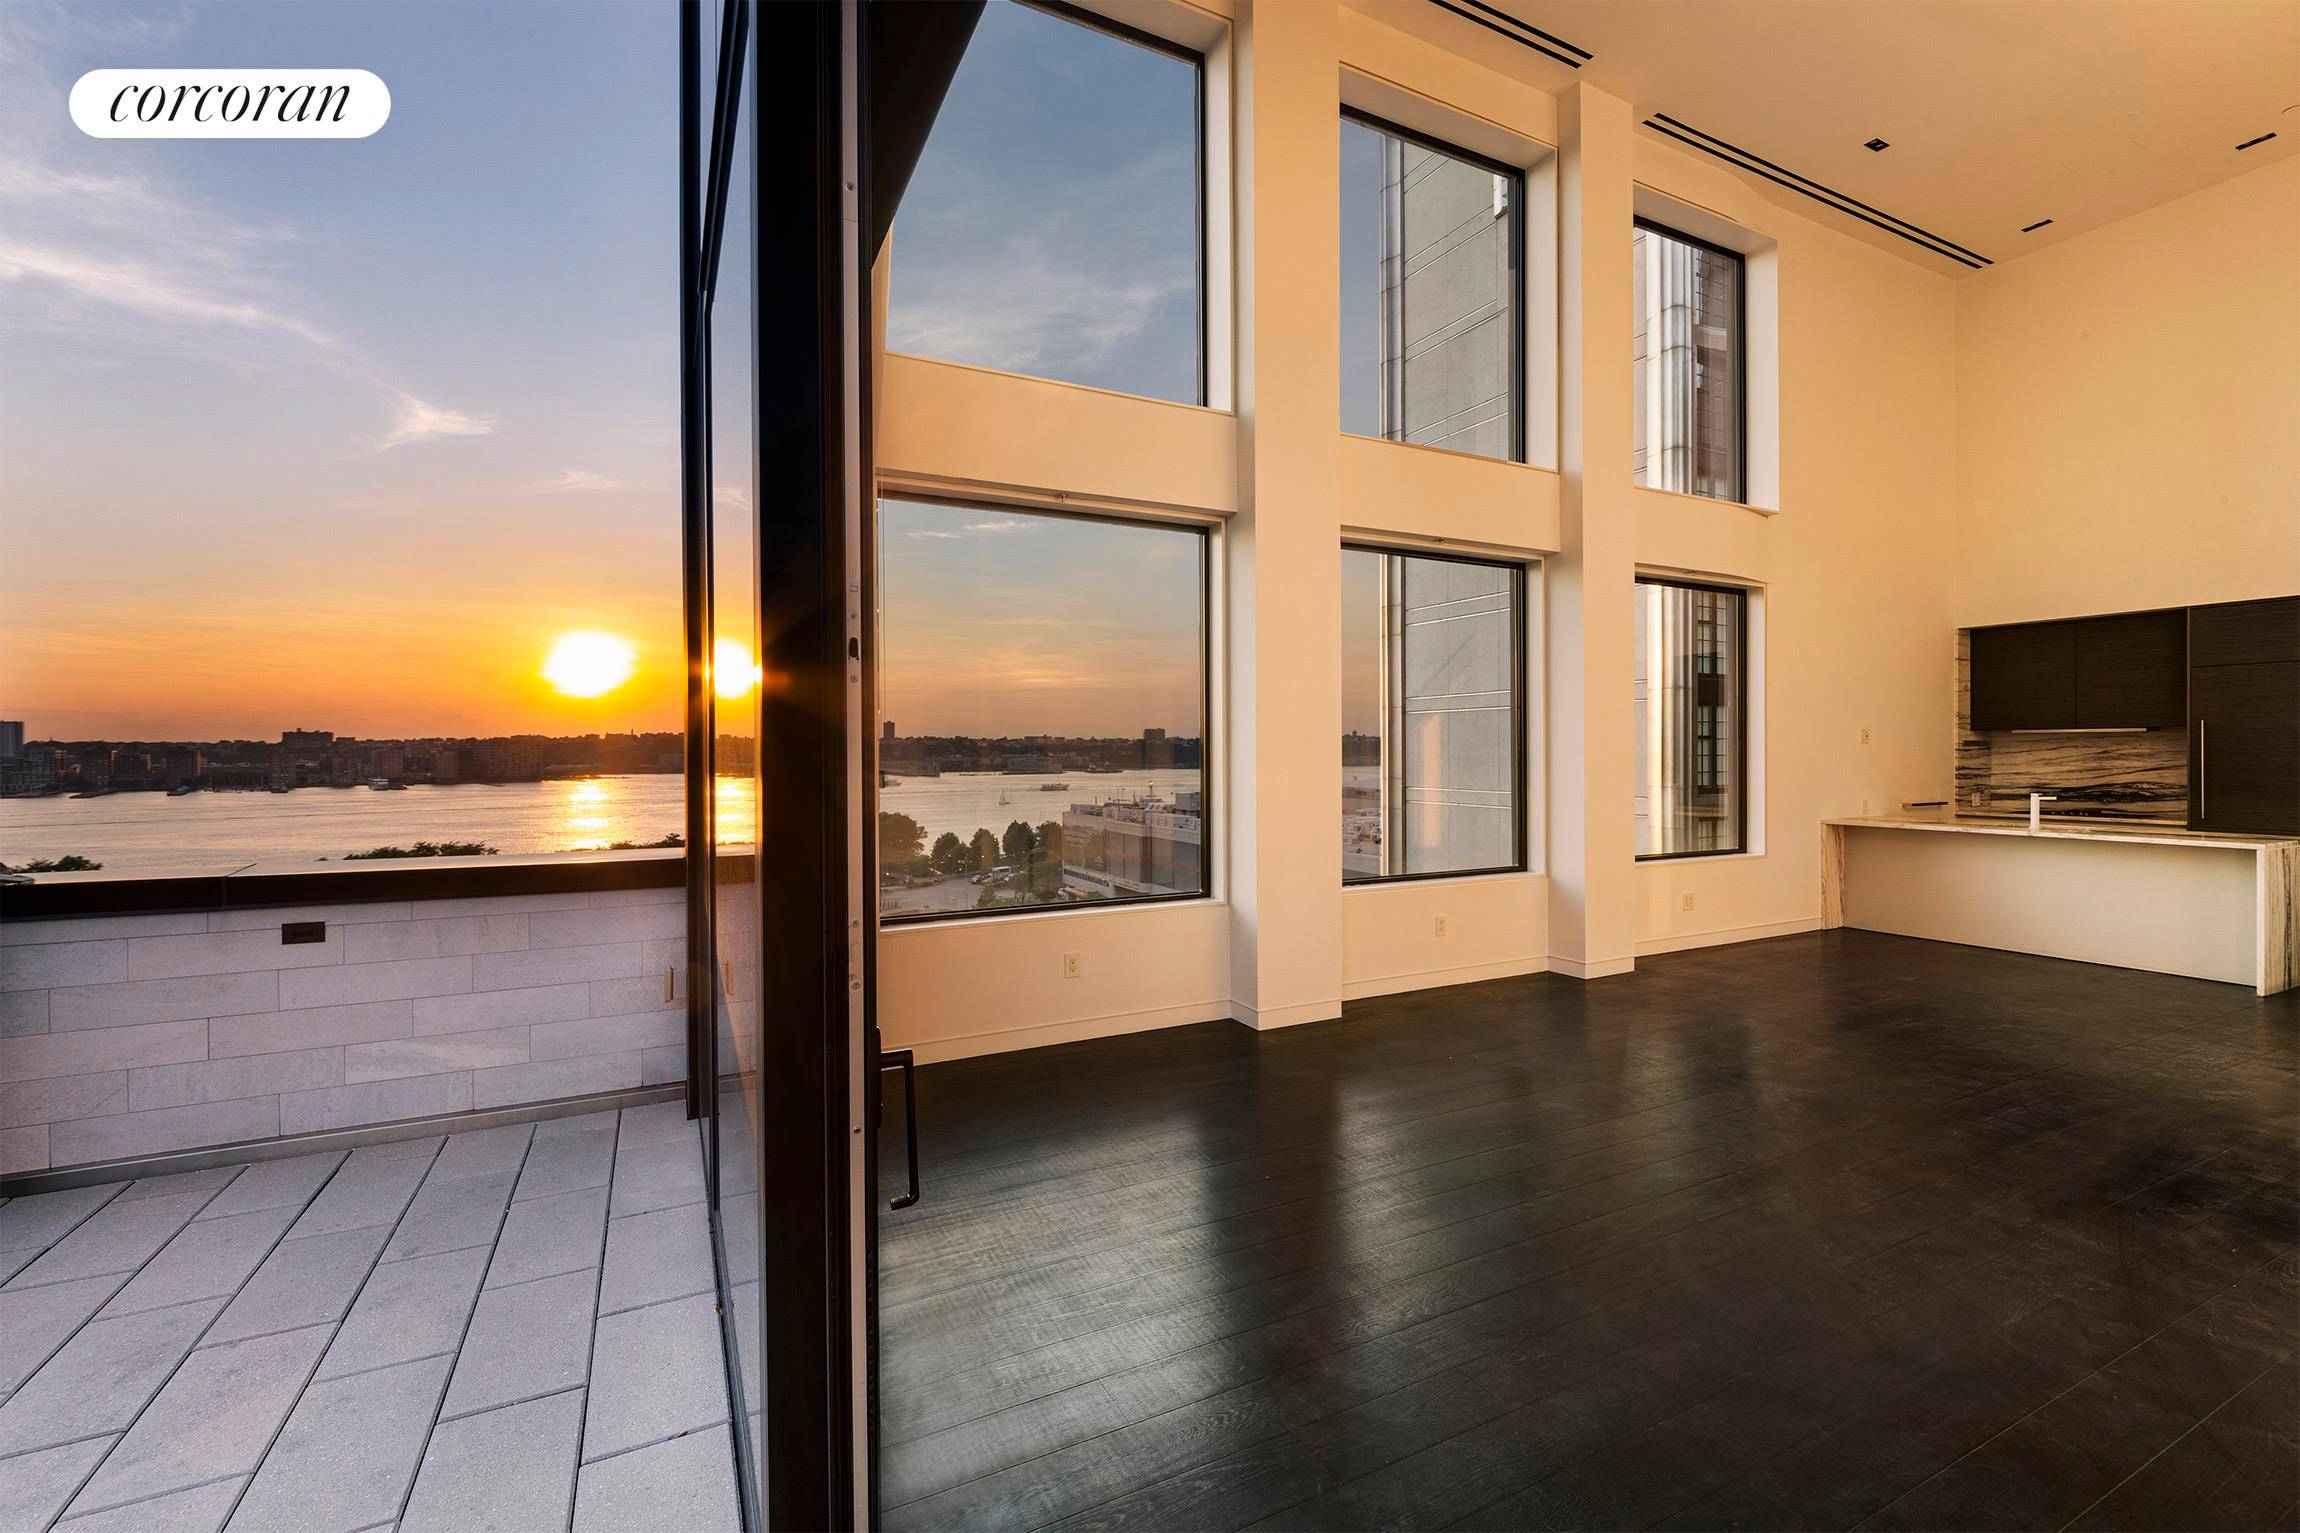 Perfection is redefined as a three bedroom, 1, 765 square foot duplex penthouse in Chelsea with exposures in every direction, and 408 square feet of outdoor space distributed between a ...